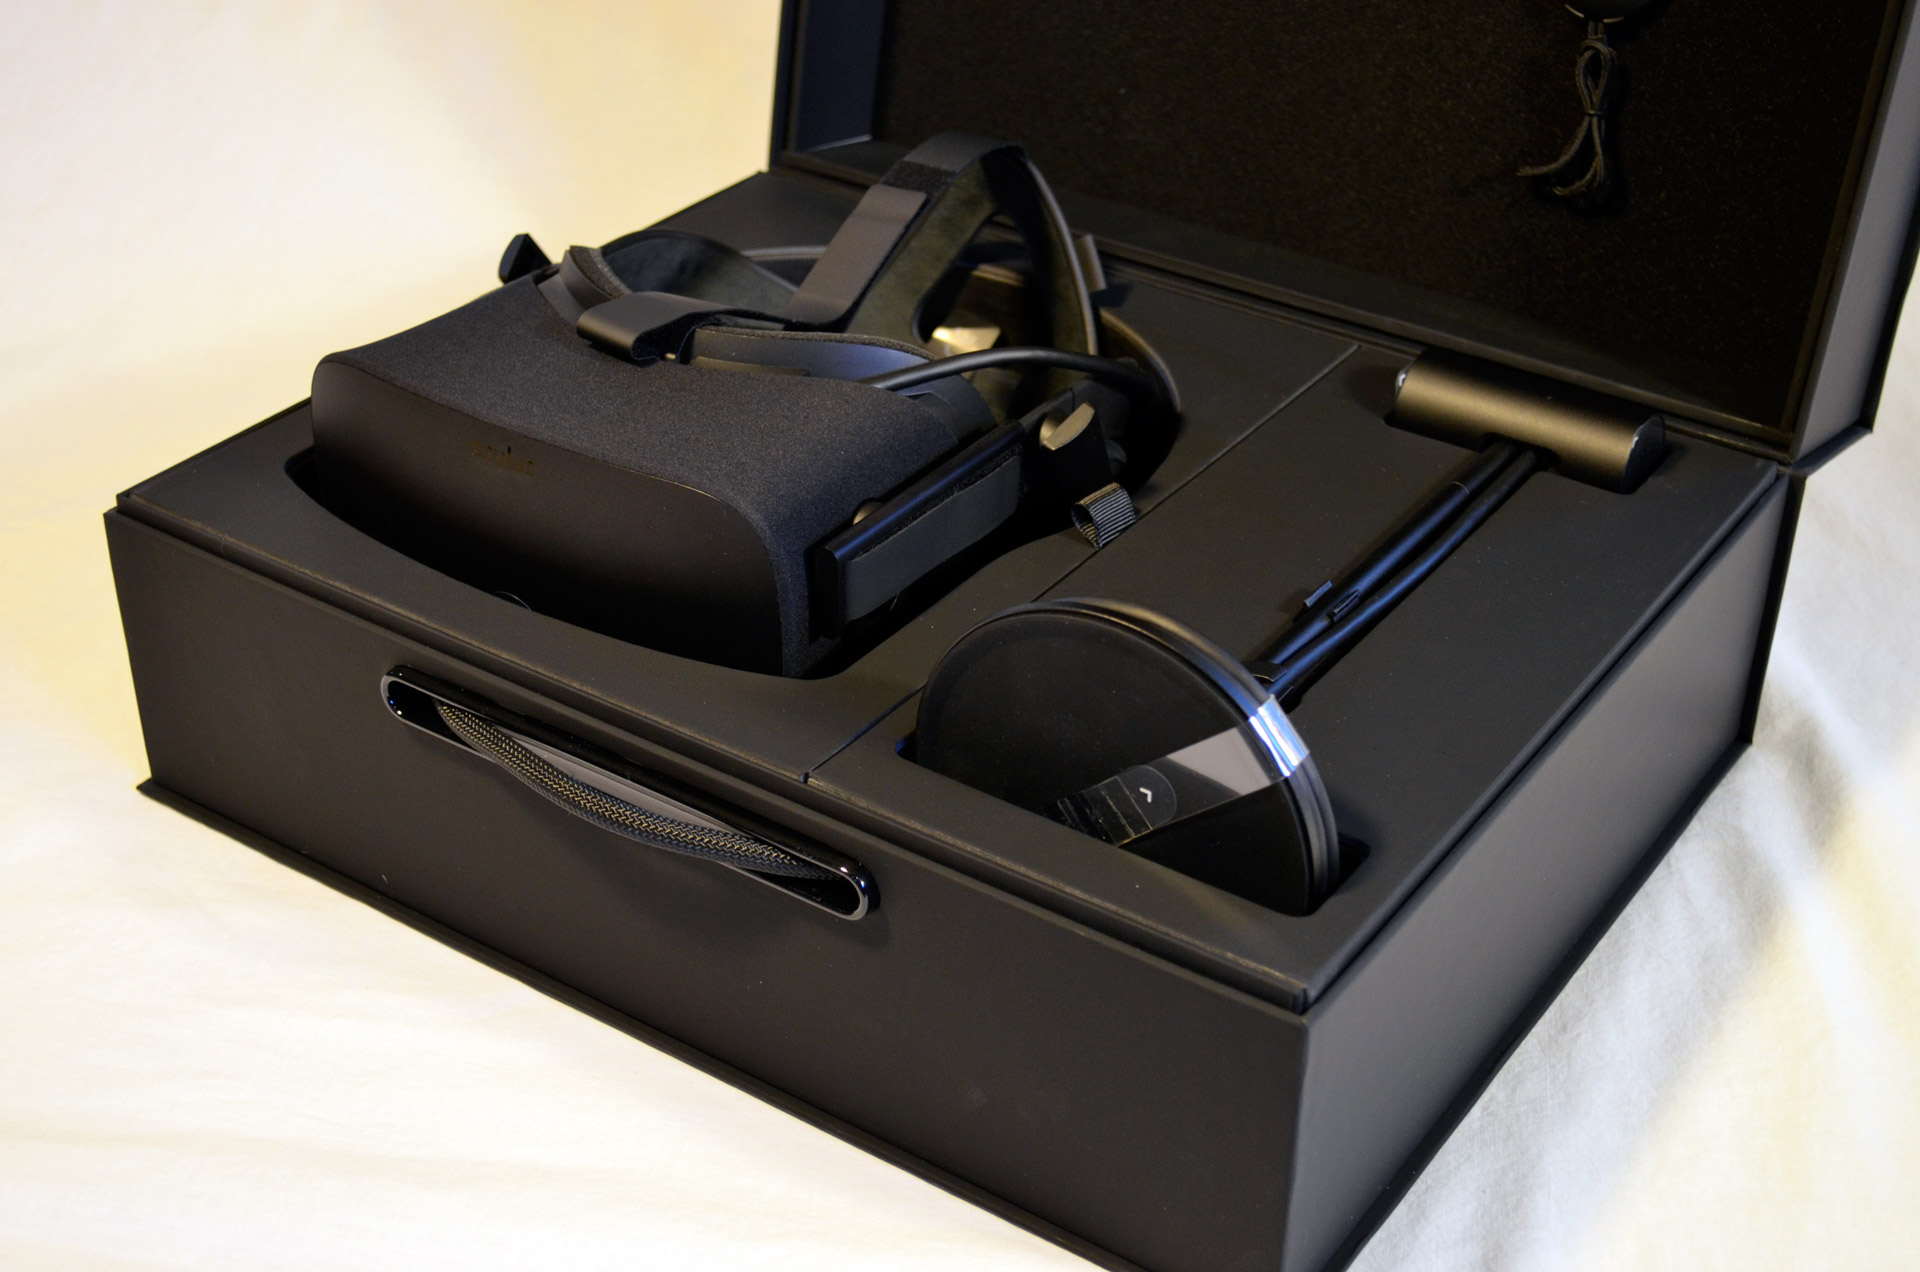 Oculus Rift Components Cost Around $200, New Teardown Suggests – Road to